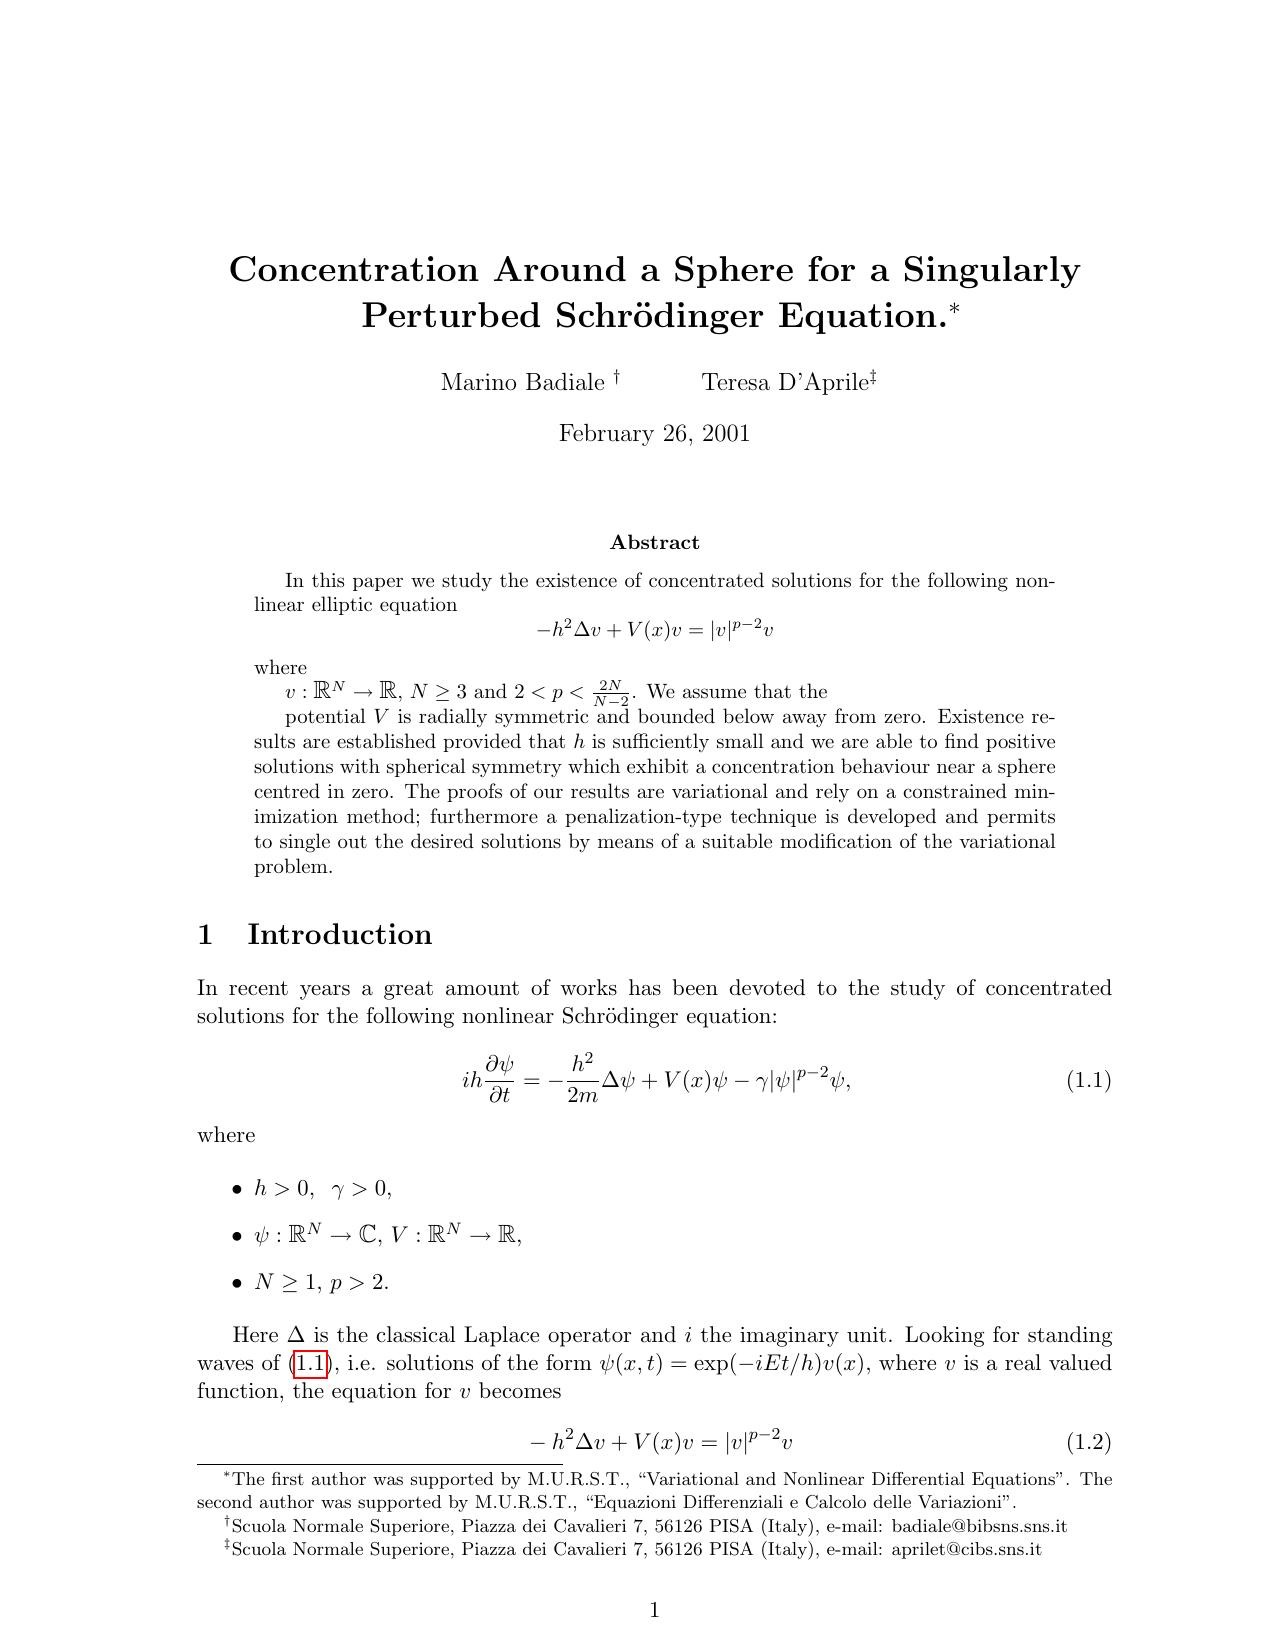 Concentration around a sphere for a singularly perturbed Schrodinger equation - Paper